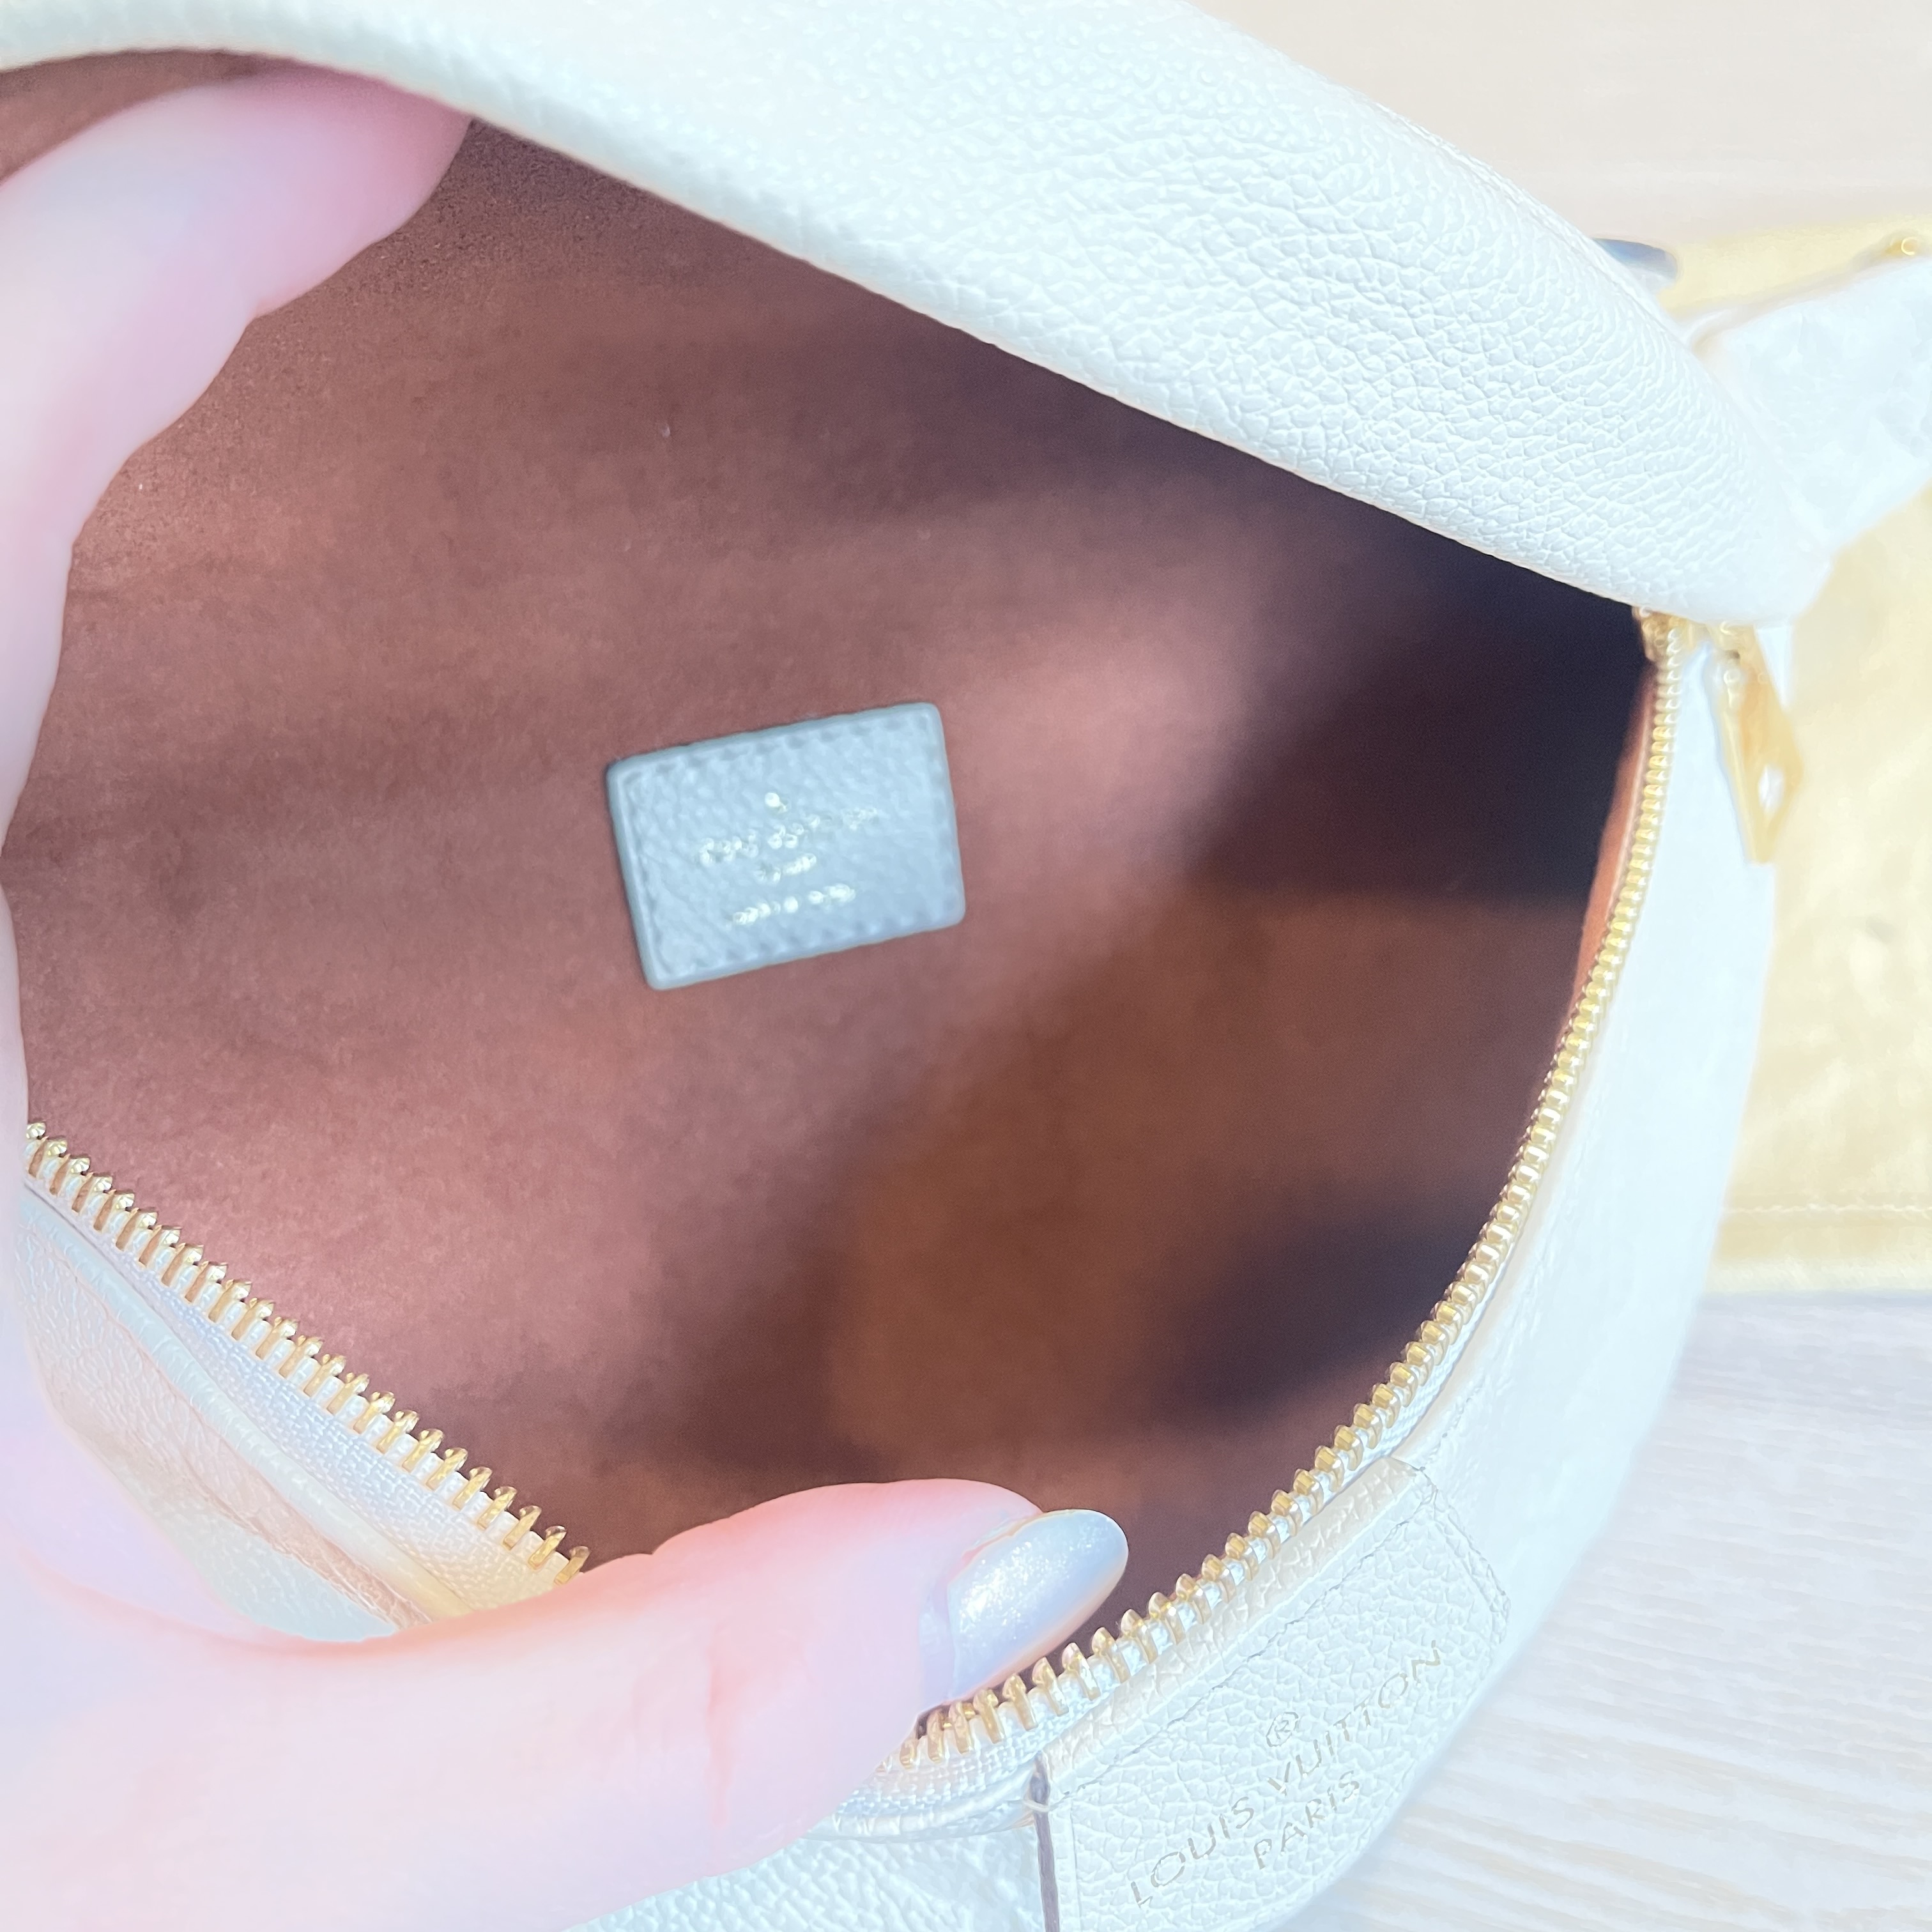 Monogram Empreinte Creme bumbag…Was this one quickly discontinued